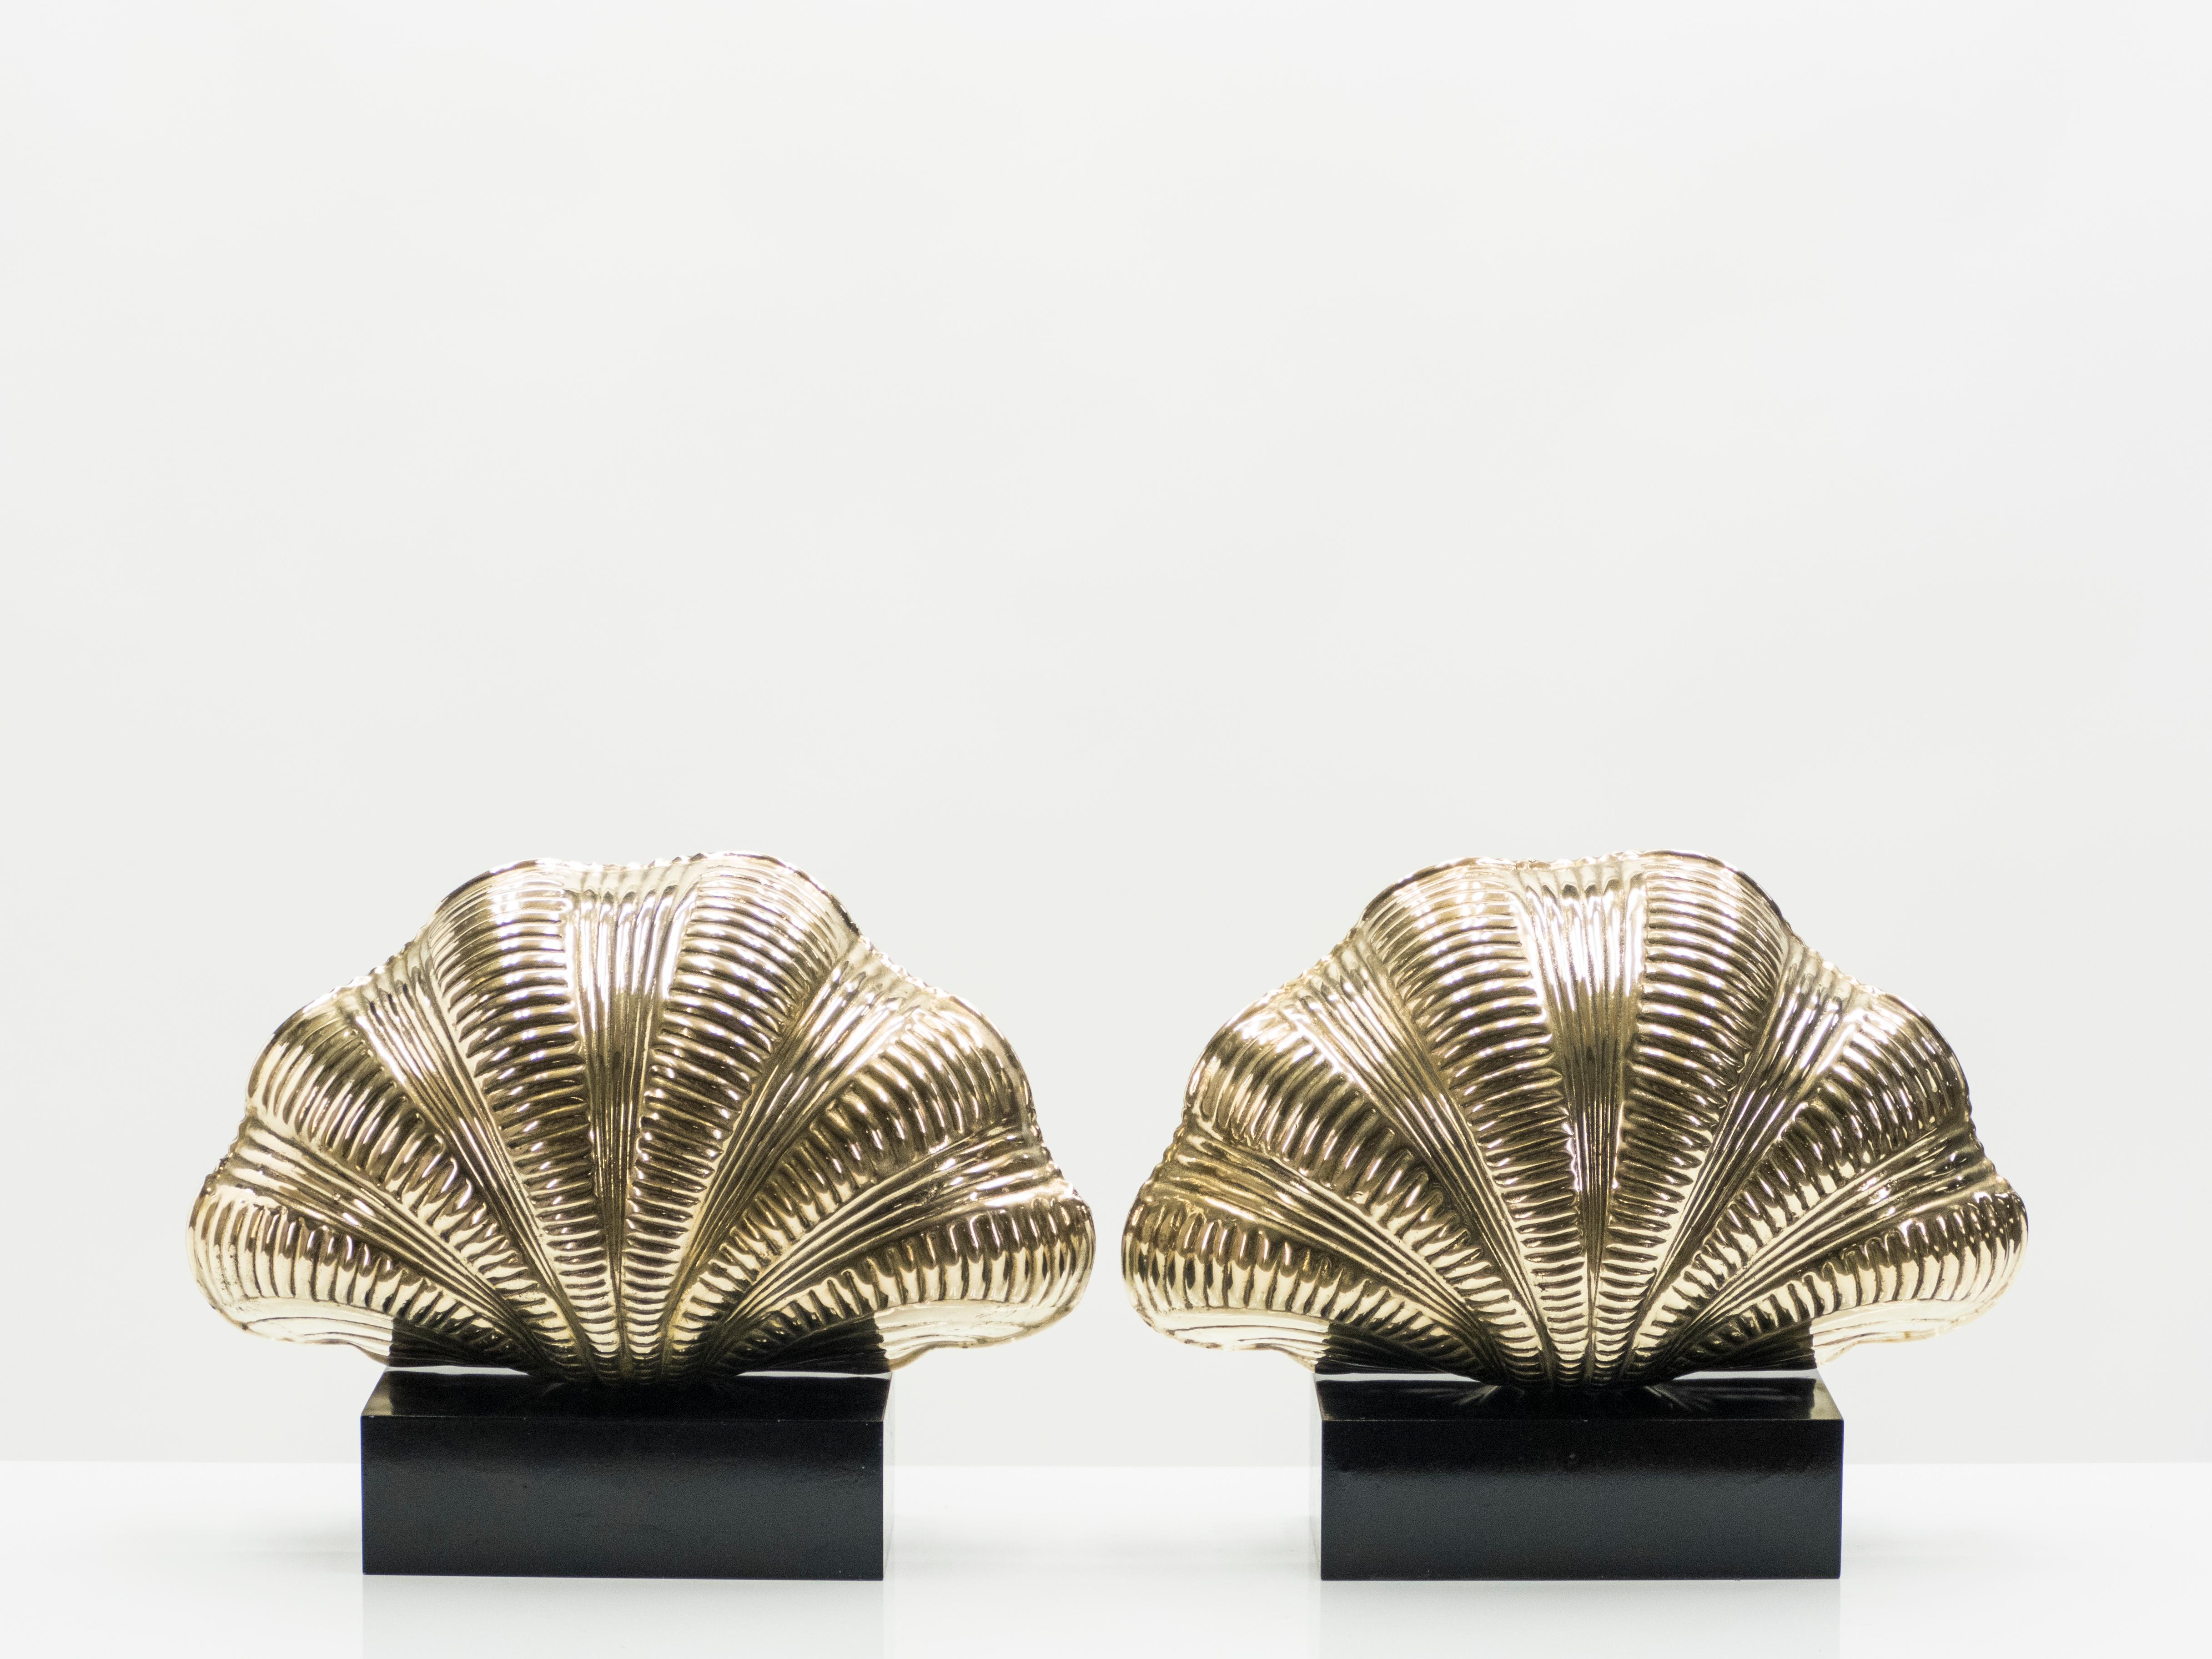 The excellence of Italian craftsmanship. A pair of artfully designed solid brass engraved wall lights from the midcentury, still in outstanding condition. Solid cast brass scallop motif forms are delicately engraved giving them a natural form.